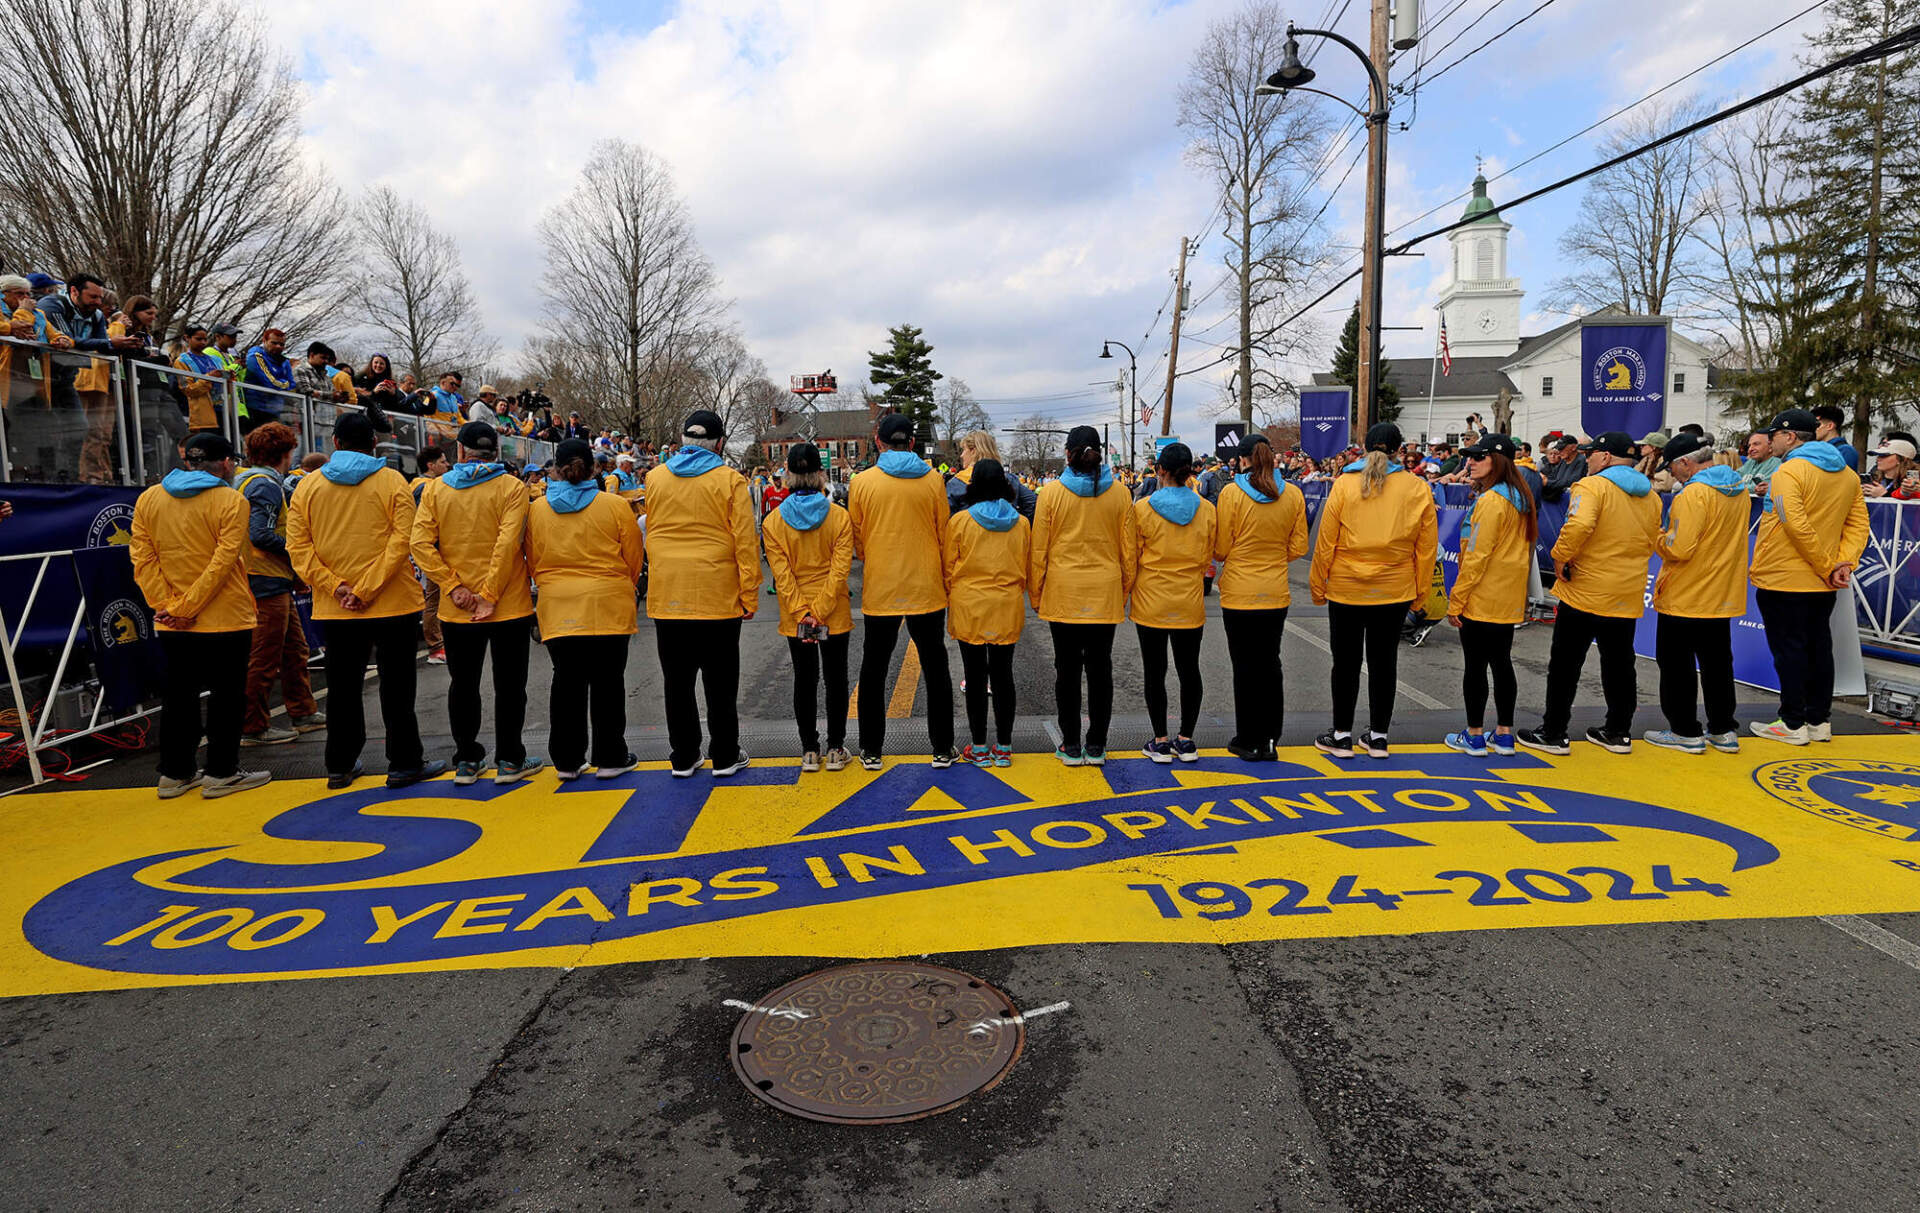 A group of volunteers at the starting line. (David L. Ryan/The Boston Globe via Getty Images)